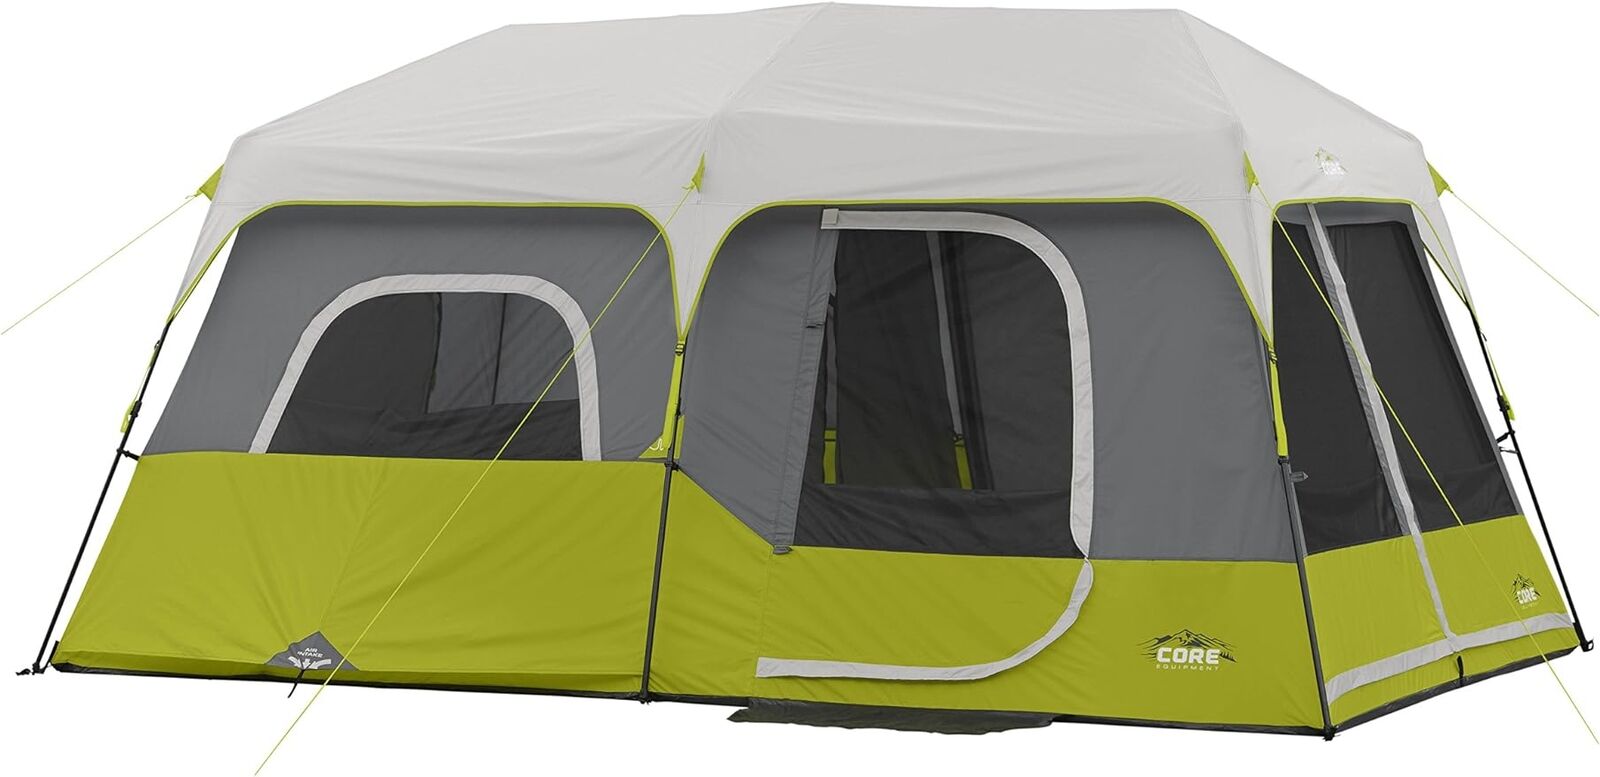 Core 9 Person Instant Cabin Tent - 14' x 9',Green,Portable,Polyester,Waterproof